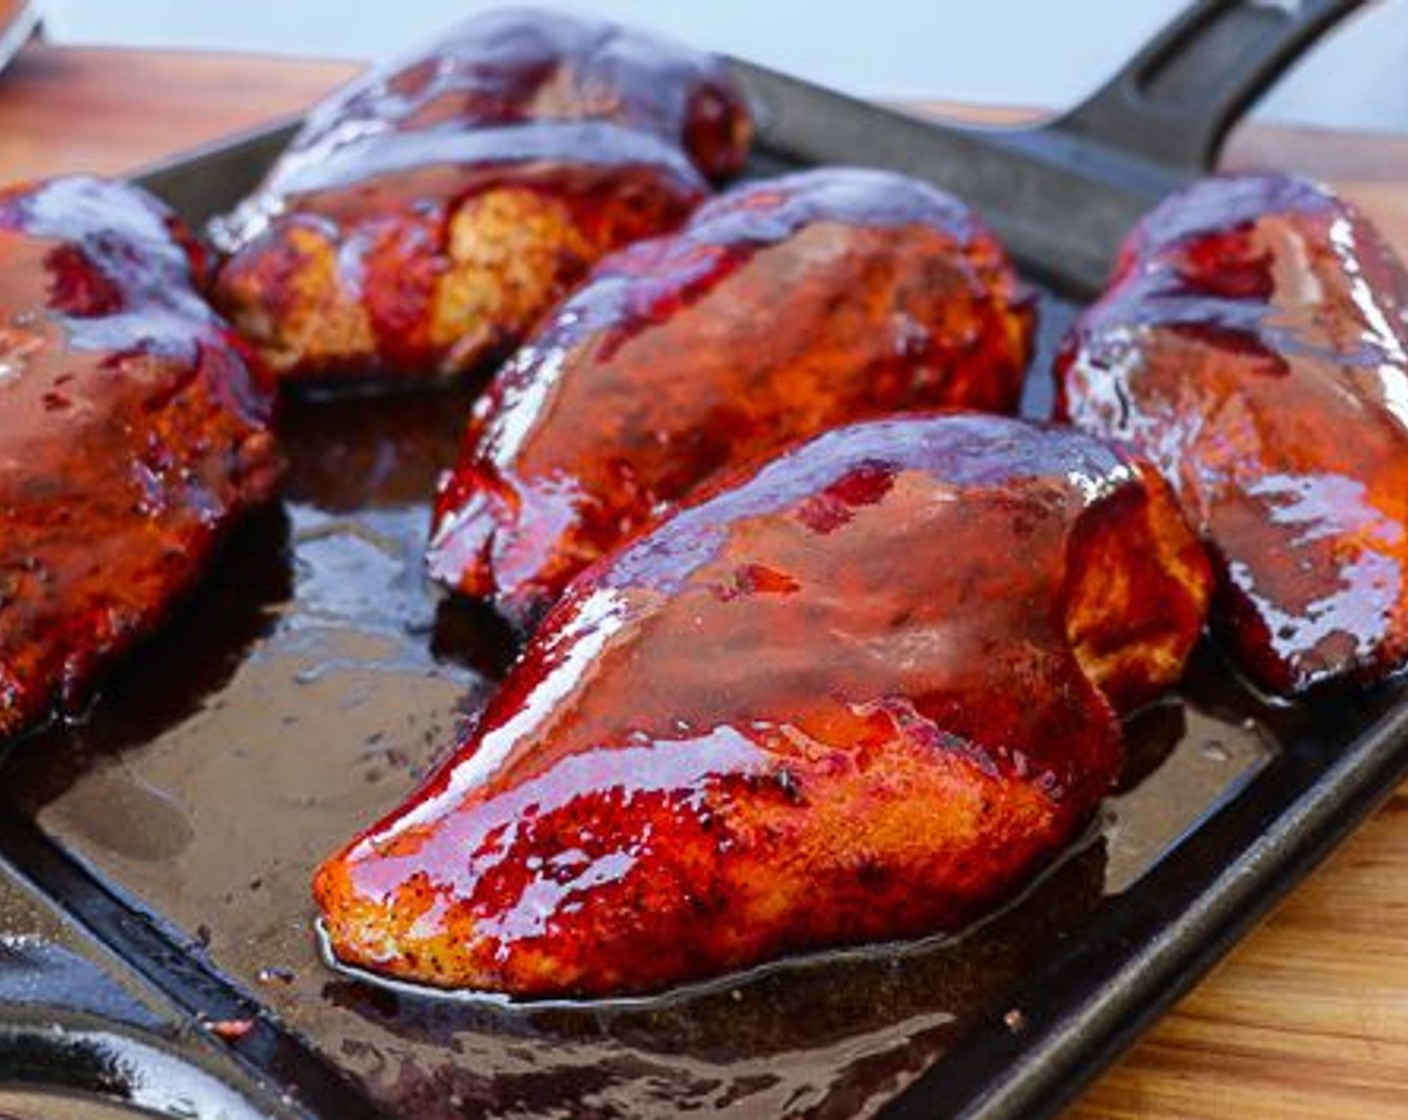 step 4 When the internal temp reaches 155 degrees F (68 degrees C) transfer the chicken breasts to a flat iron skillet and glazes with Barbecue Sauce (1 cup). Continue to cook the breasts until the internal reaches 165 degrees F (73 degrees C).